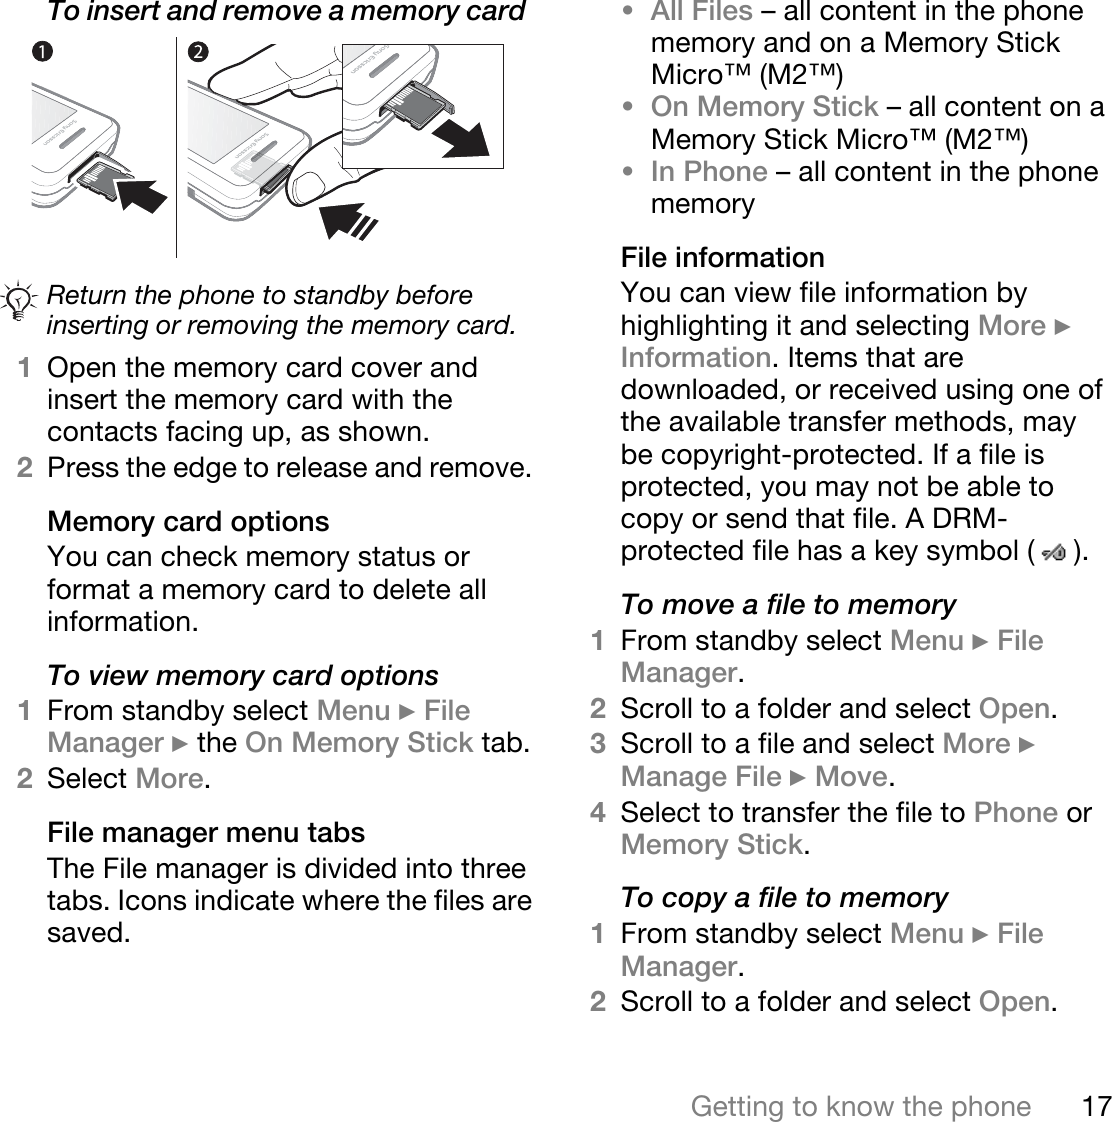 17Getting to know the phoneTo insert and remove a memory card  1Open the memory card cover and insert the memory card with the contacts facing up, as shown.2Press the edge to release and remove. Memory card optionsYou can check memory status or format a memory card to delete all information.To view memory card options1From standby select Menu } File Manager } the On Memory Stick tab.2Select More.File manager menu tabsThe File manager is divided into three tabs. Icons indicate where the files are saved.•All Files – all content in the phone memory and on a Memory Stick Micro™ (M2™)•On Memory Stick – all content on a Memory Stick Micro™ (M2™)•In Phone – all content in the phone memoryFile informationYou can view file information by highlighting it and selecting More } Information. Items that are downloaded, or received using one of the available transfer methods, may be copyright-protected. If a file is protected, you may not be able to copy or send that file. A DRM-protected file has a key symbol ( ). To move a file to memory1From standby select Menu } File Manager.2Scroll to a folder and select Open.3Scroll to a file and select More } Manage File } Move. 4Select to transfer the file to Phone or Memory Stick.To copy a file to memory1From standby select Menu } File Manager.2Scroll to a folder and select Open.Return the phone to standby before inserting or removing the memory card.